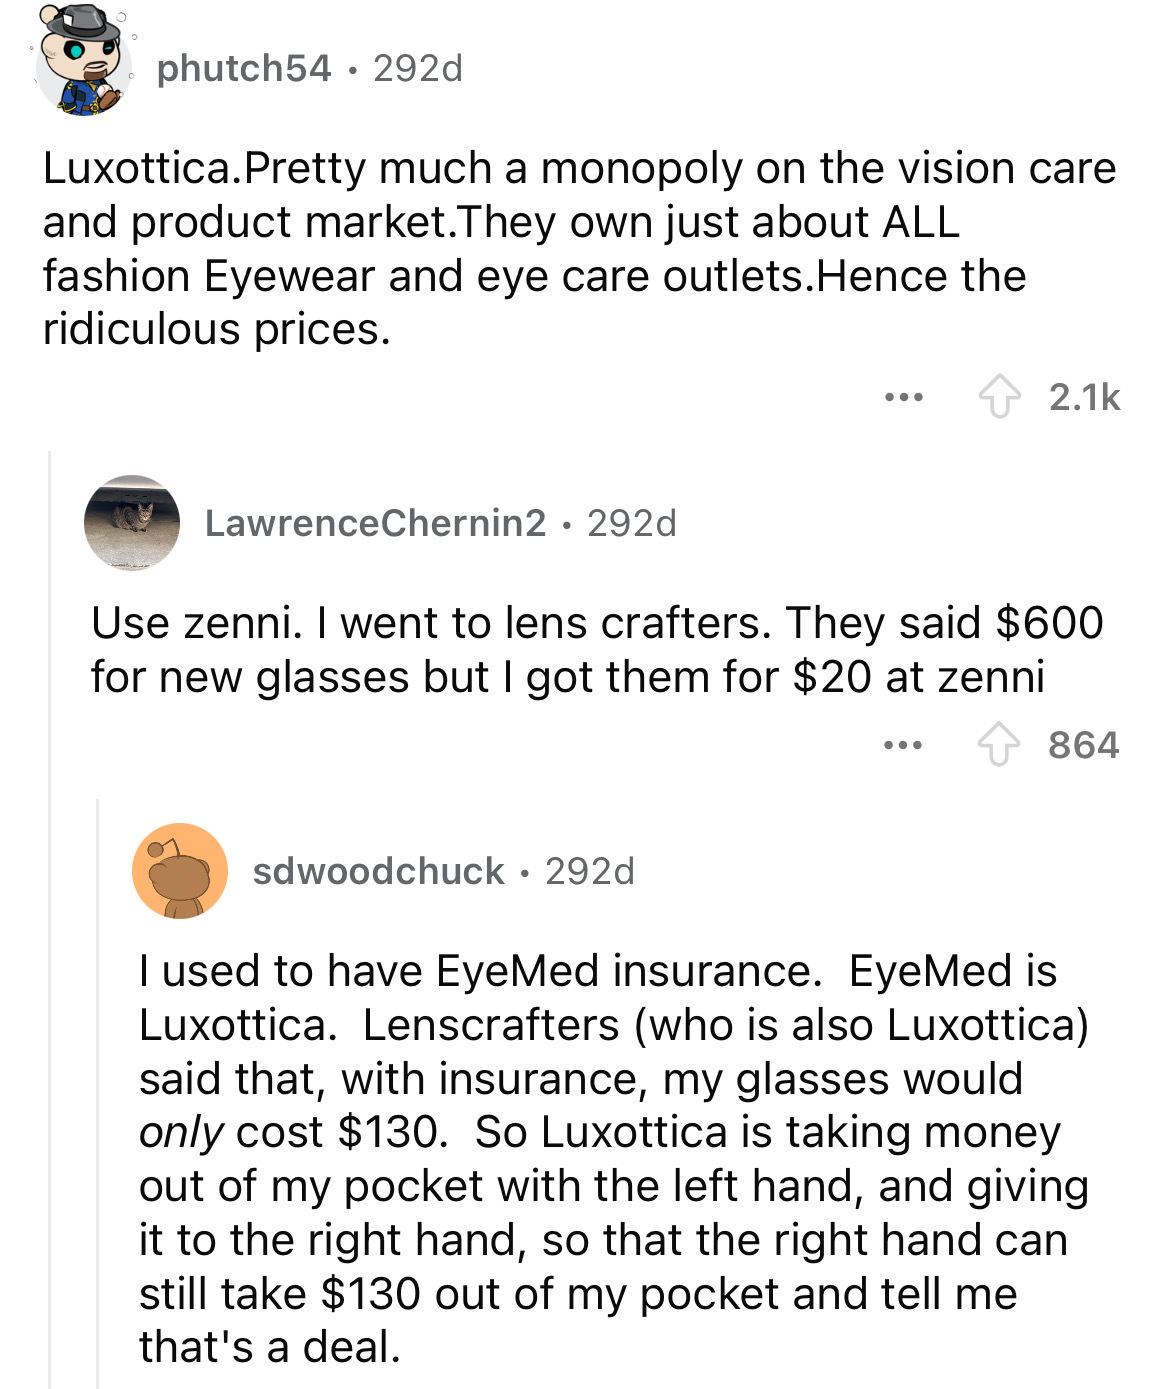 document - phutch54 292d Luxottica.Pretty much a monopoly on the vision care. and product market. They own just about All fashion Eyewear and eye care outlets. Hence the ridiculous prices. ... LawrenceChernin2 292d Use zenni. I went to lens crafters. They